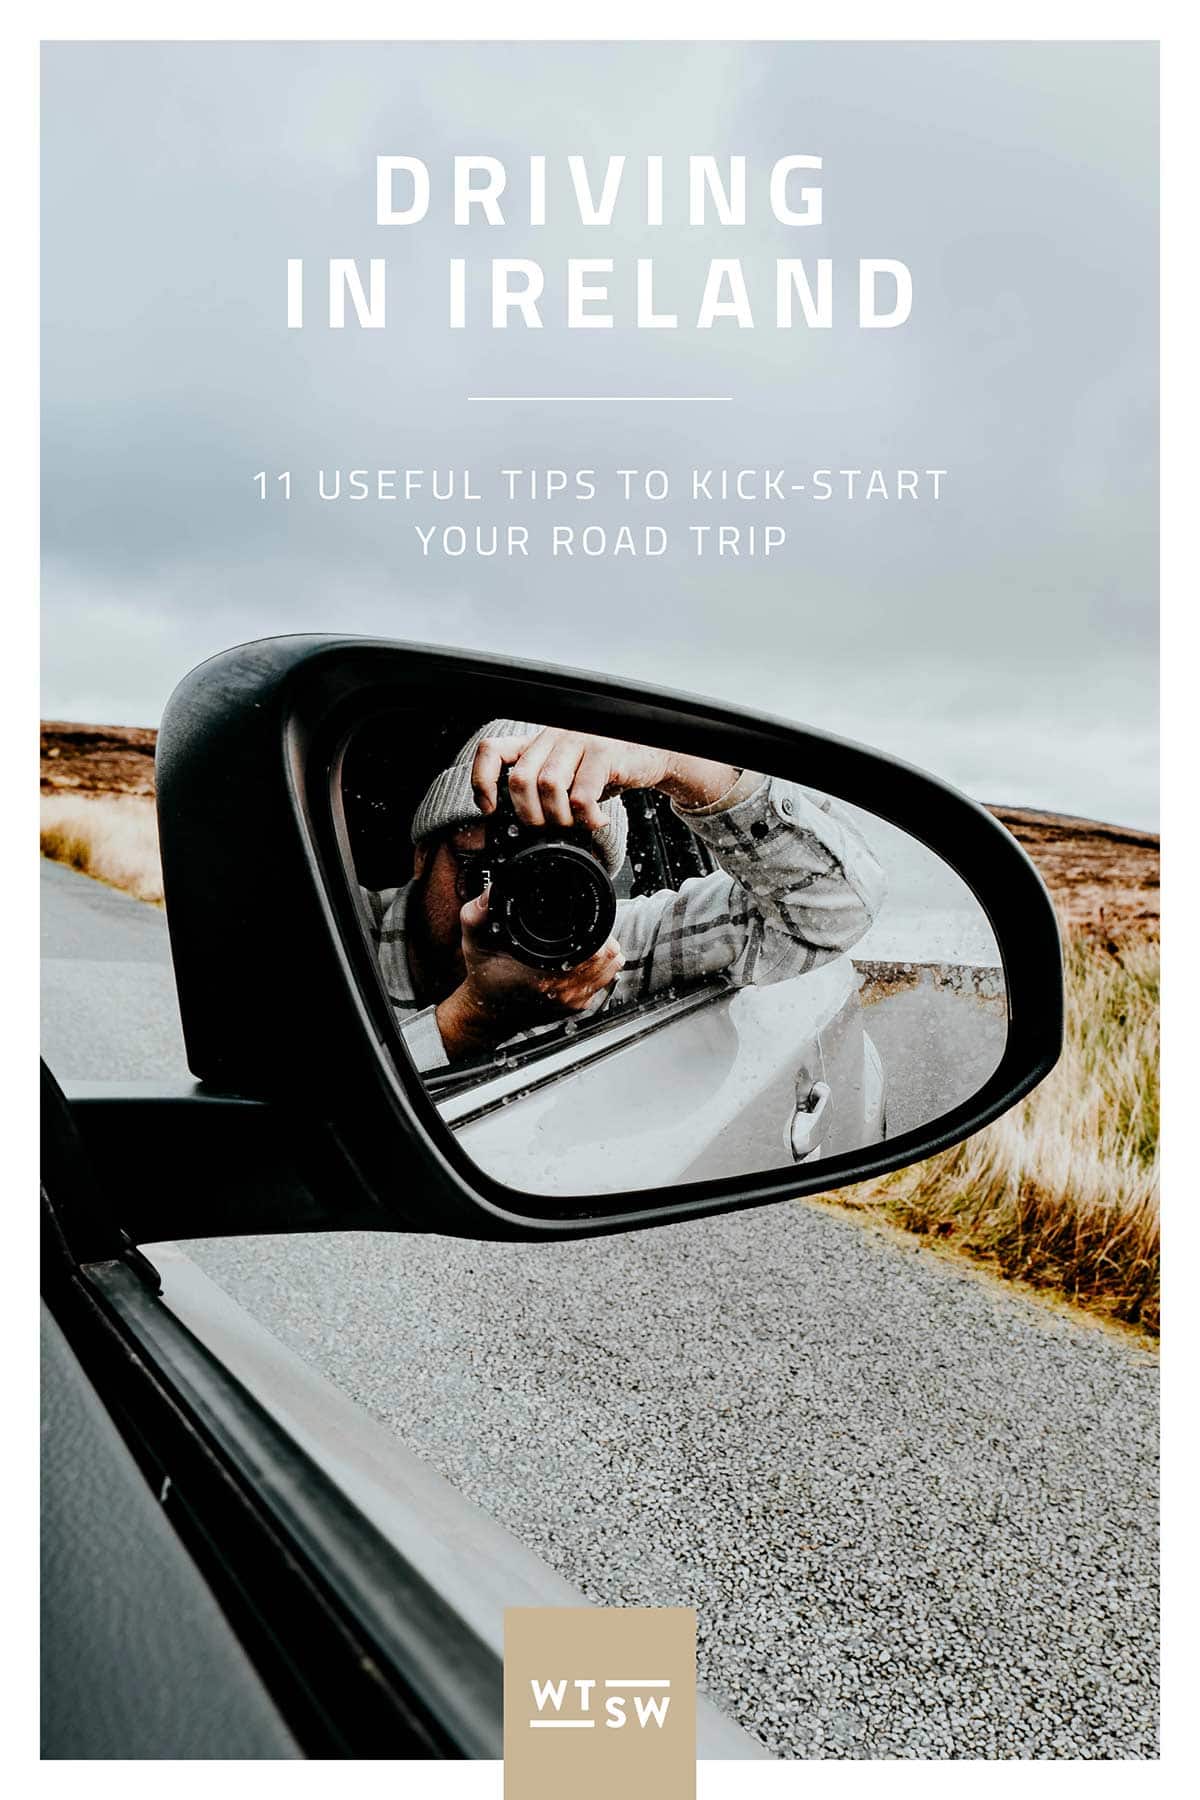 How to Prepare For a Road Trip  Road Trip Guide Dublin, OH